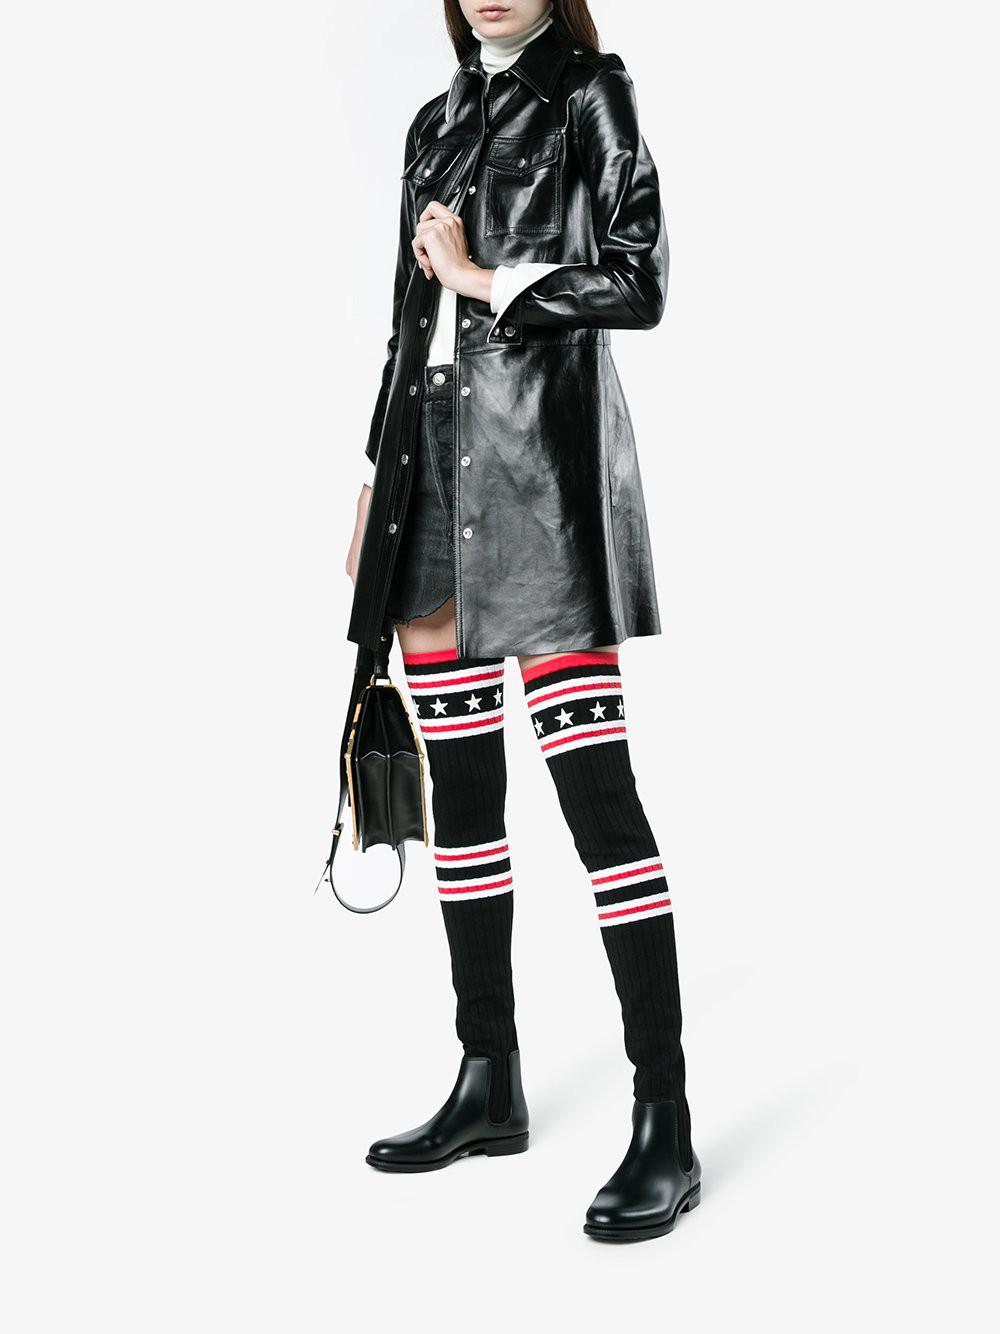 givenchy over the knee sock boots